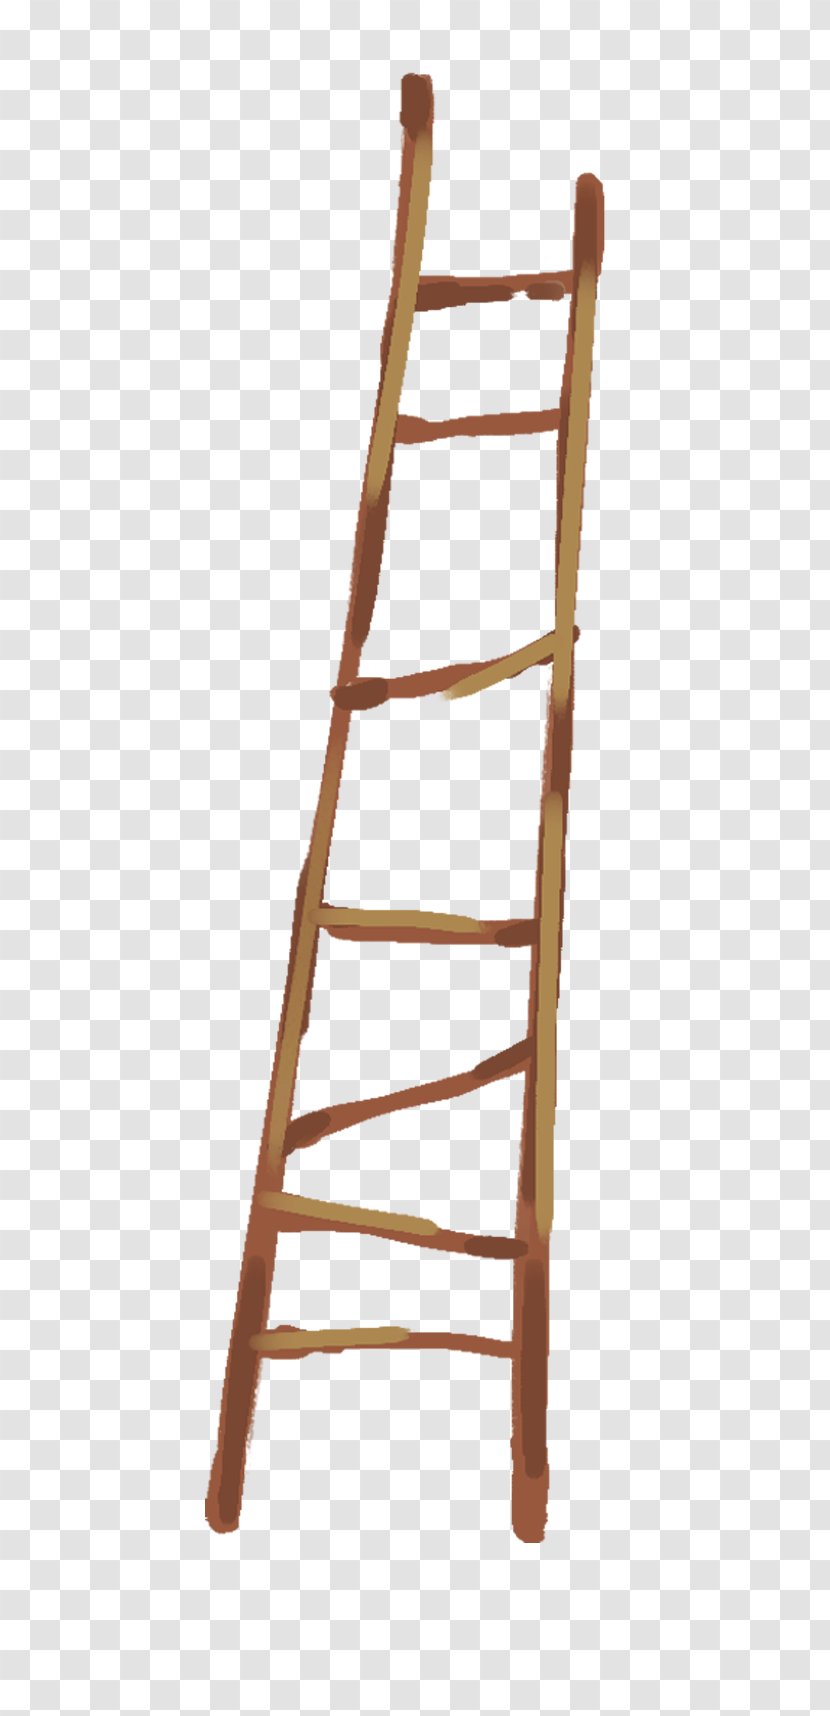 Escalator Stairs Ladder - Wooden Transparent PNG